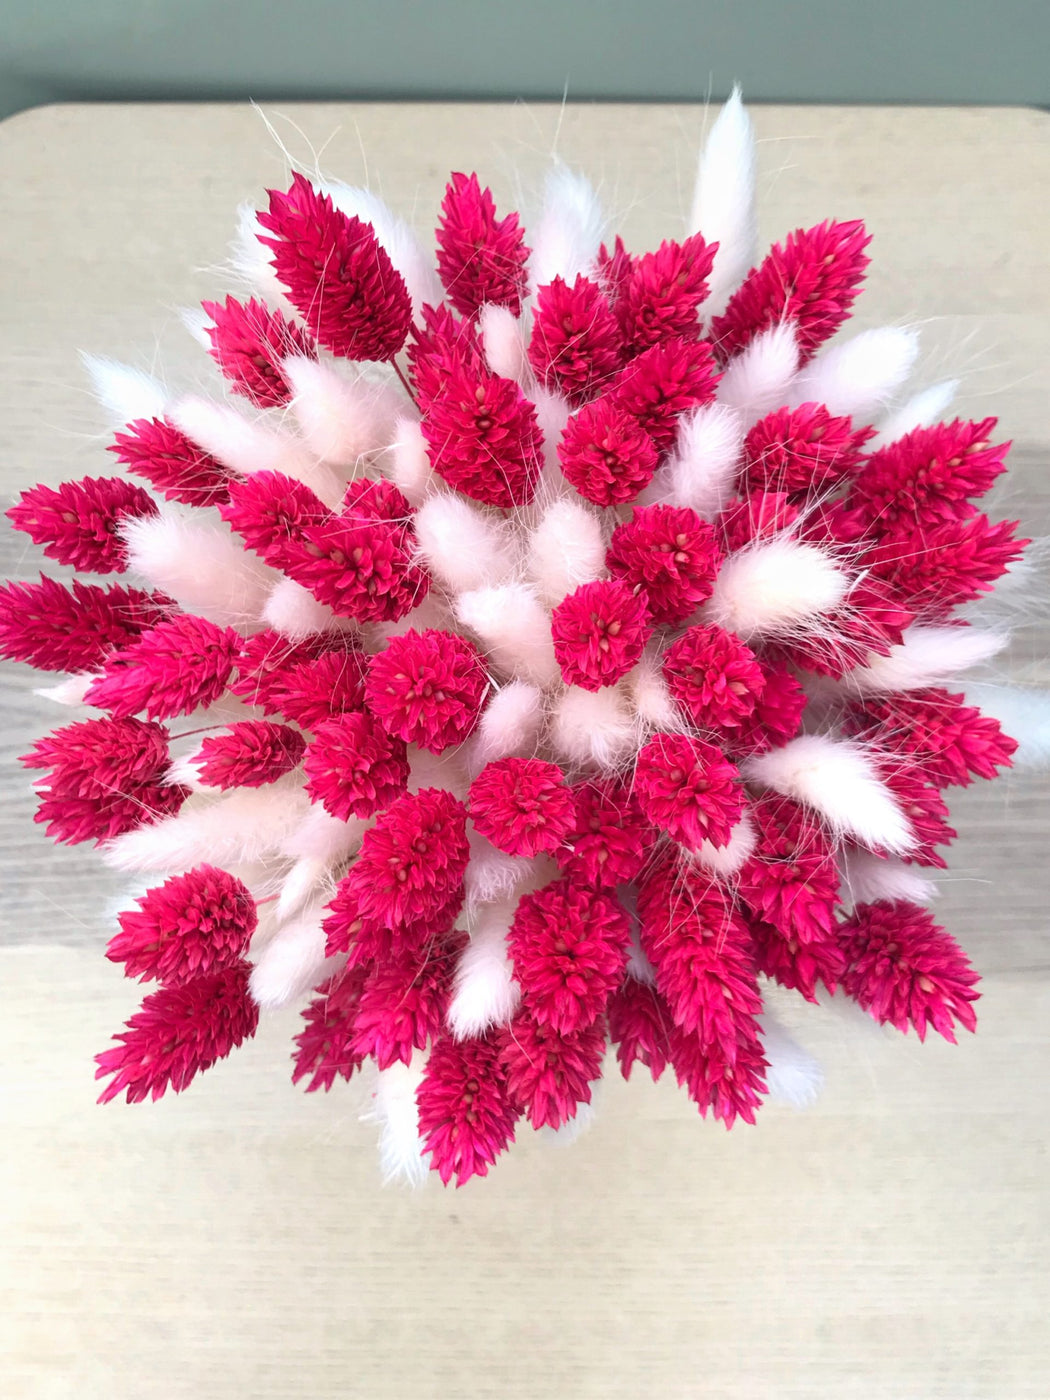 Bouquet of fuchsia and white dried flowers - Bouquet “Roxane”